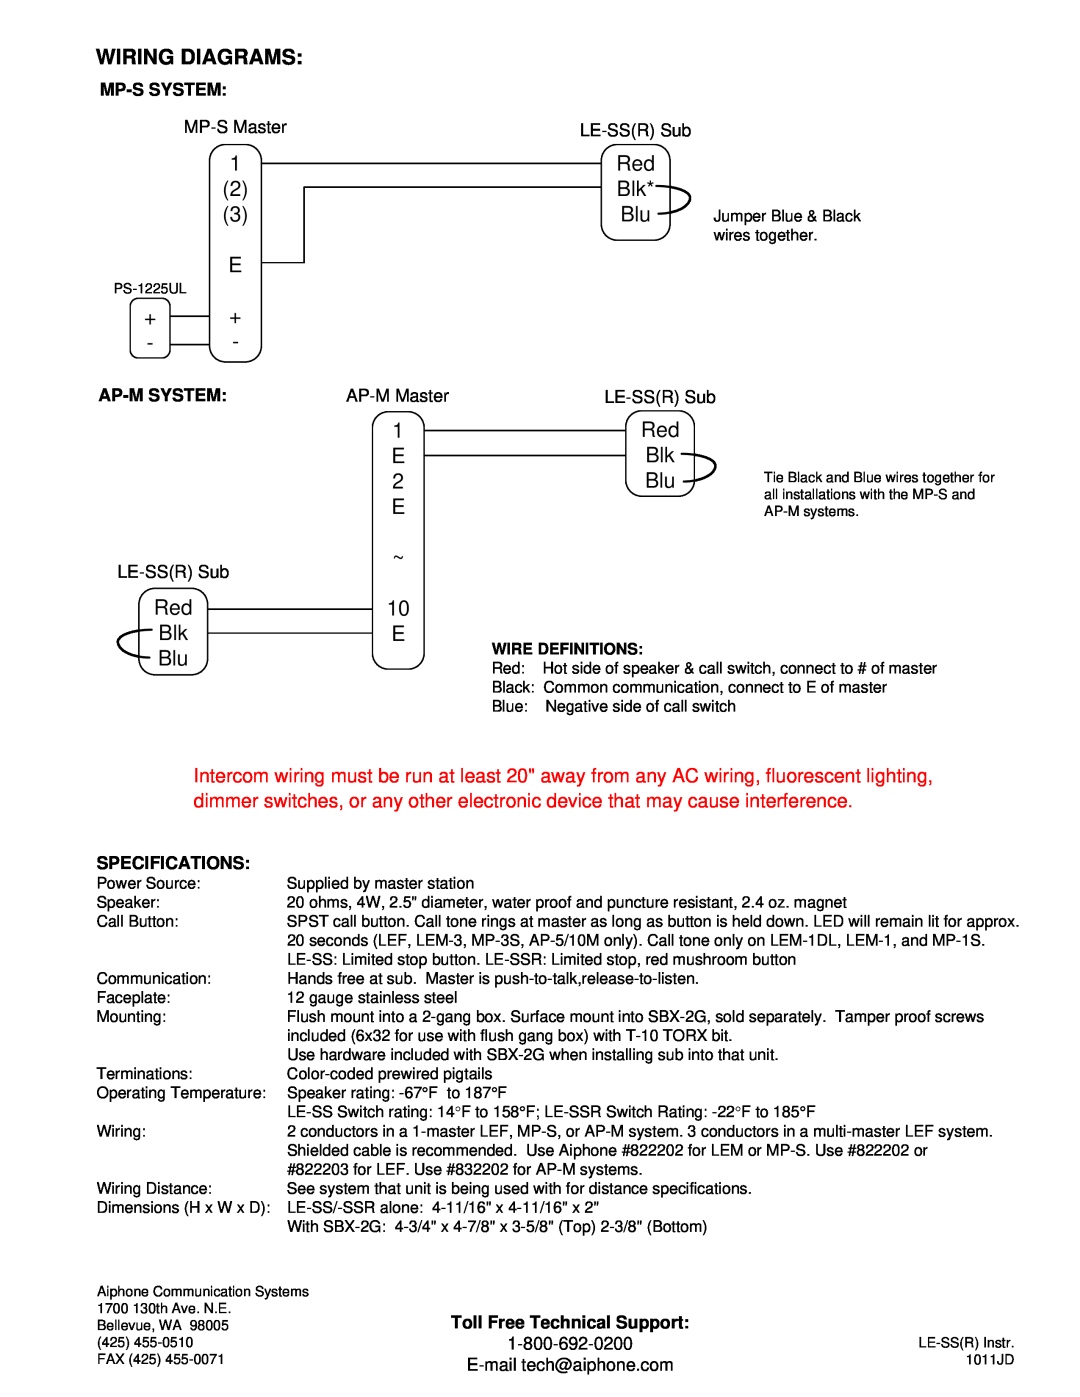 Aiphone LE-SS/LE-SSR manual Mp-S System, Ap-M System, Specifications, Toll Free Technical Support, Wiring Diagrams 